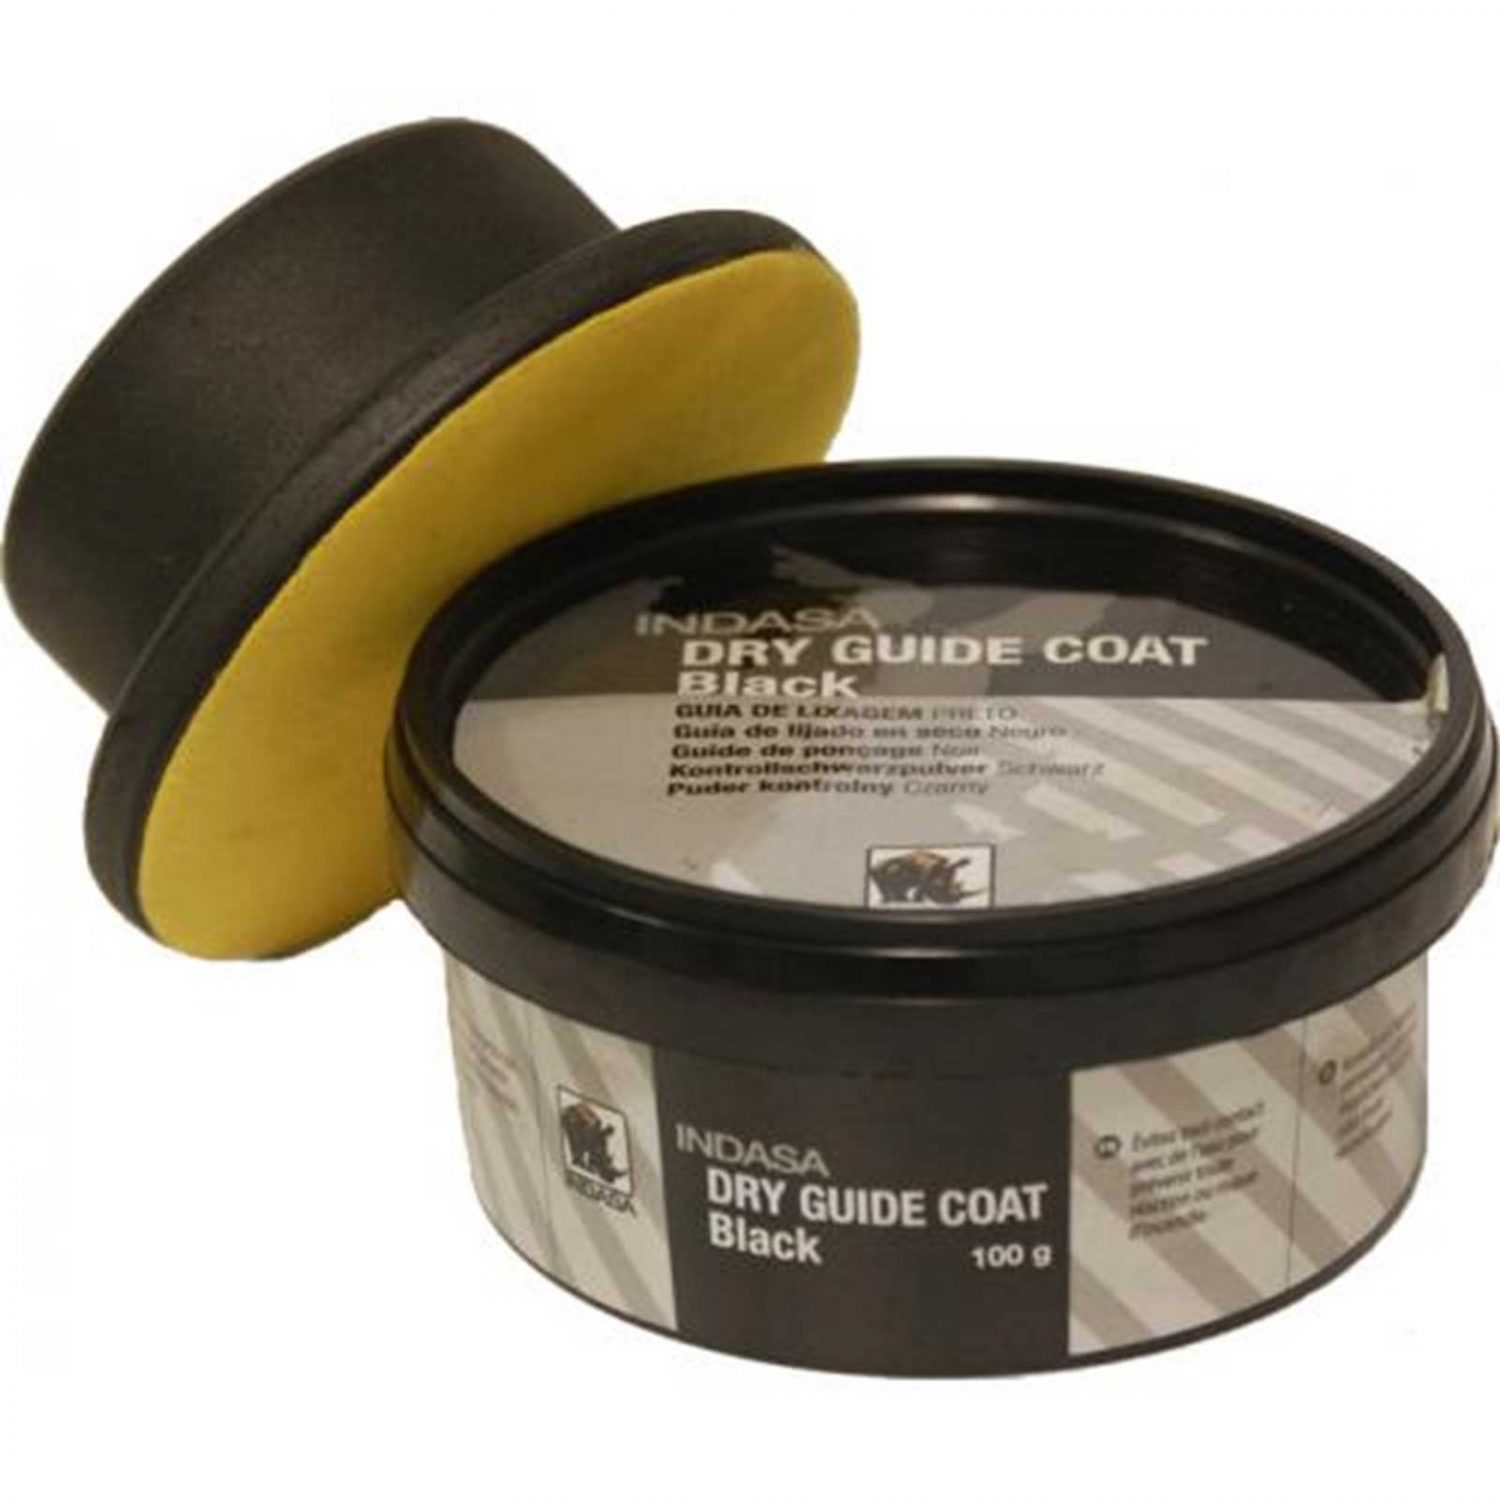 DRY GUIDE COAT - Rustbuster